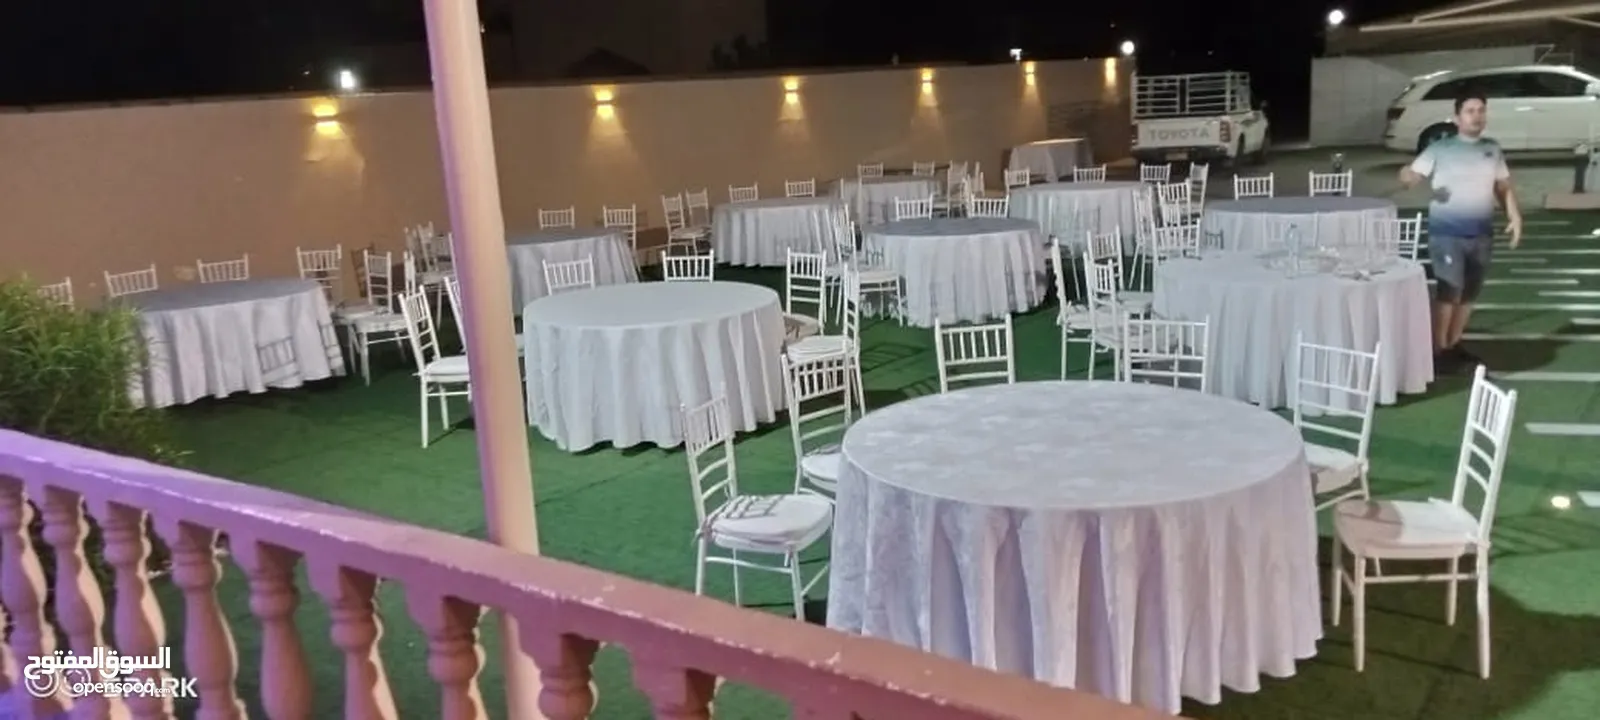 Glory events and wedding service we have tables chairs wedding stage fairy lights vip tents air cool